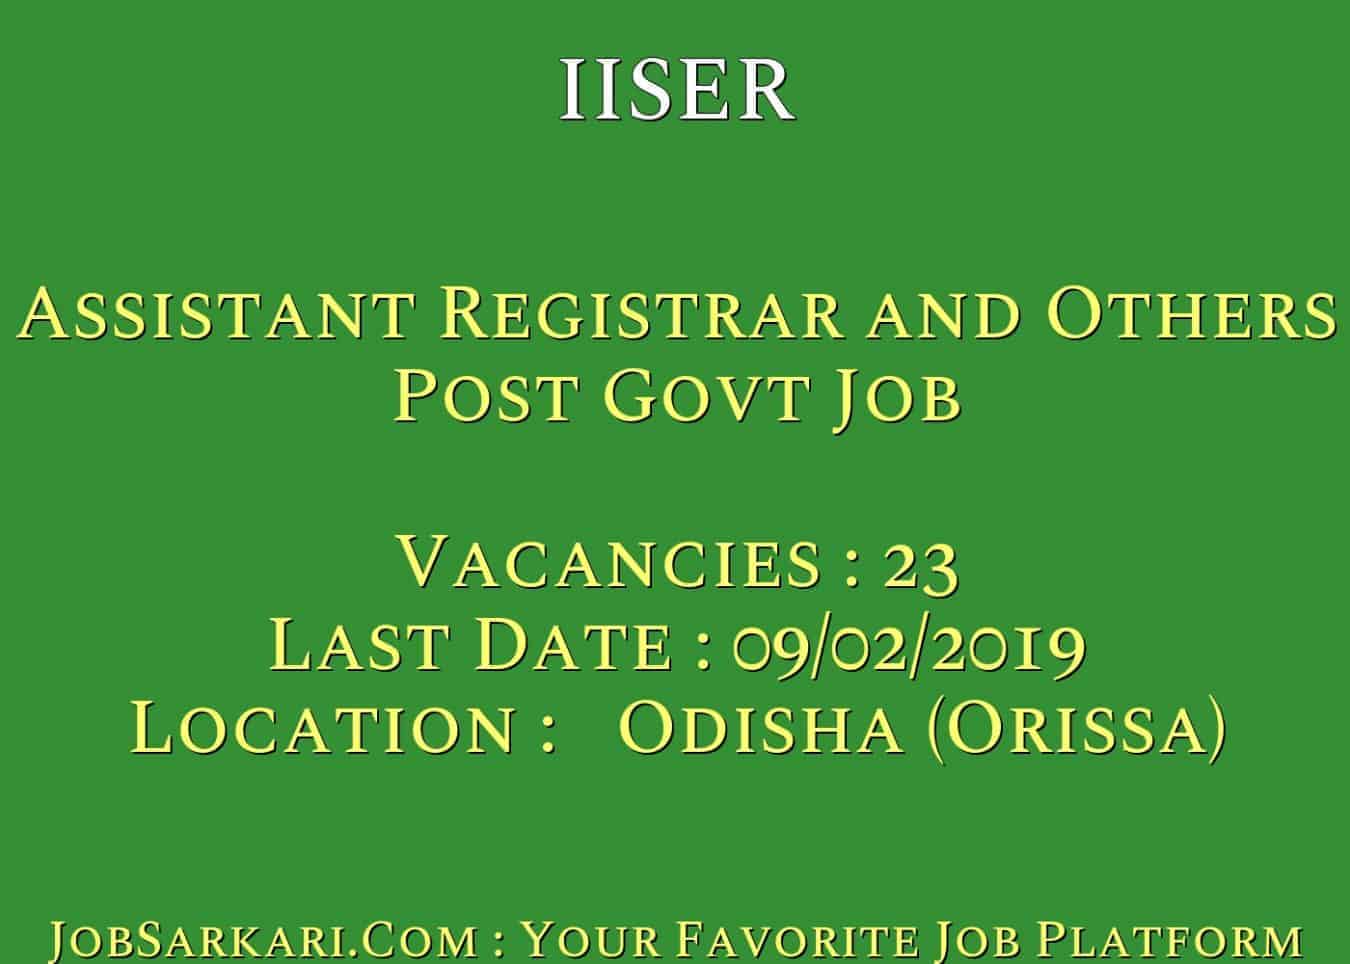 IISER Recruitment 2019 For Assistant Registrar and Others Post Govt Job